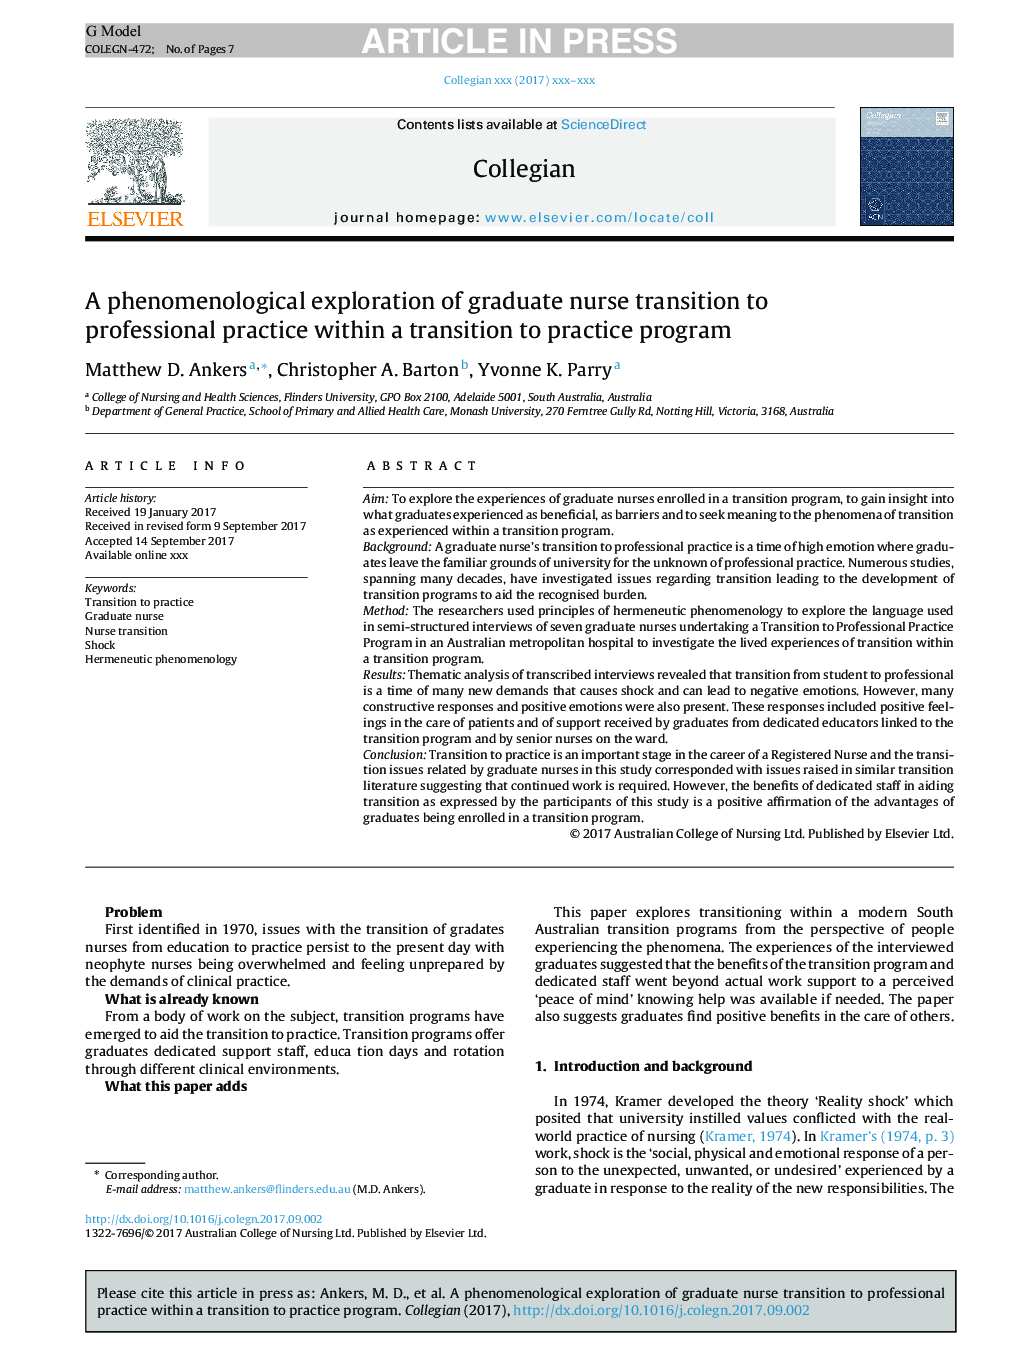 A phenomenological exploration of graduate nurse transition to professional practice within a transition to practice program